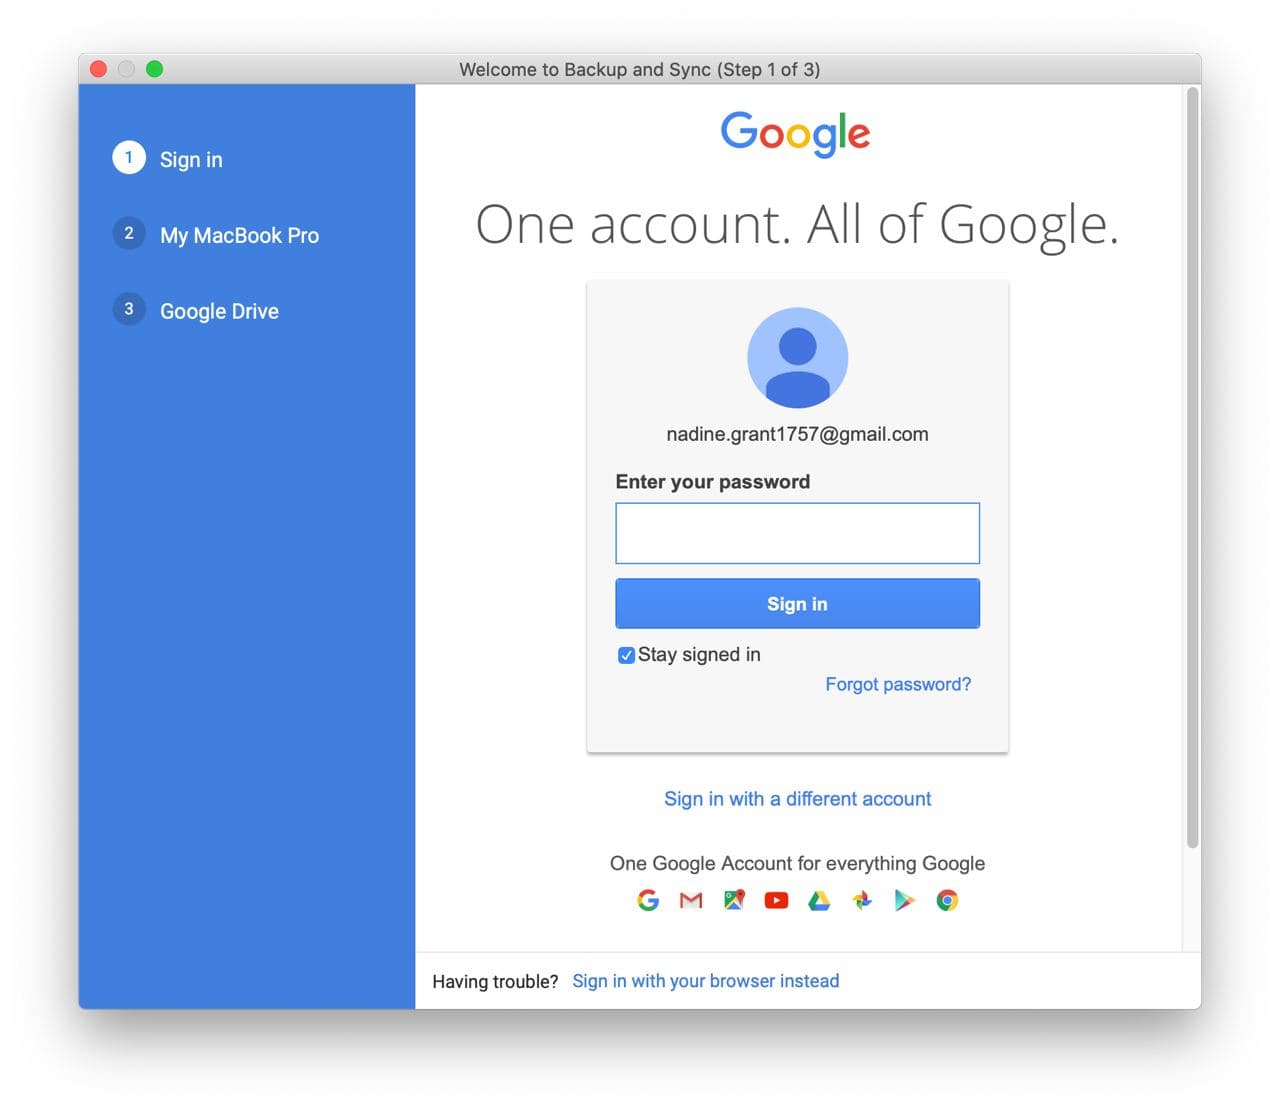 Log in to Google Drive